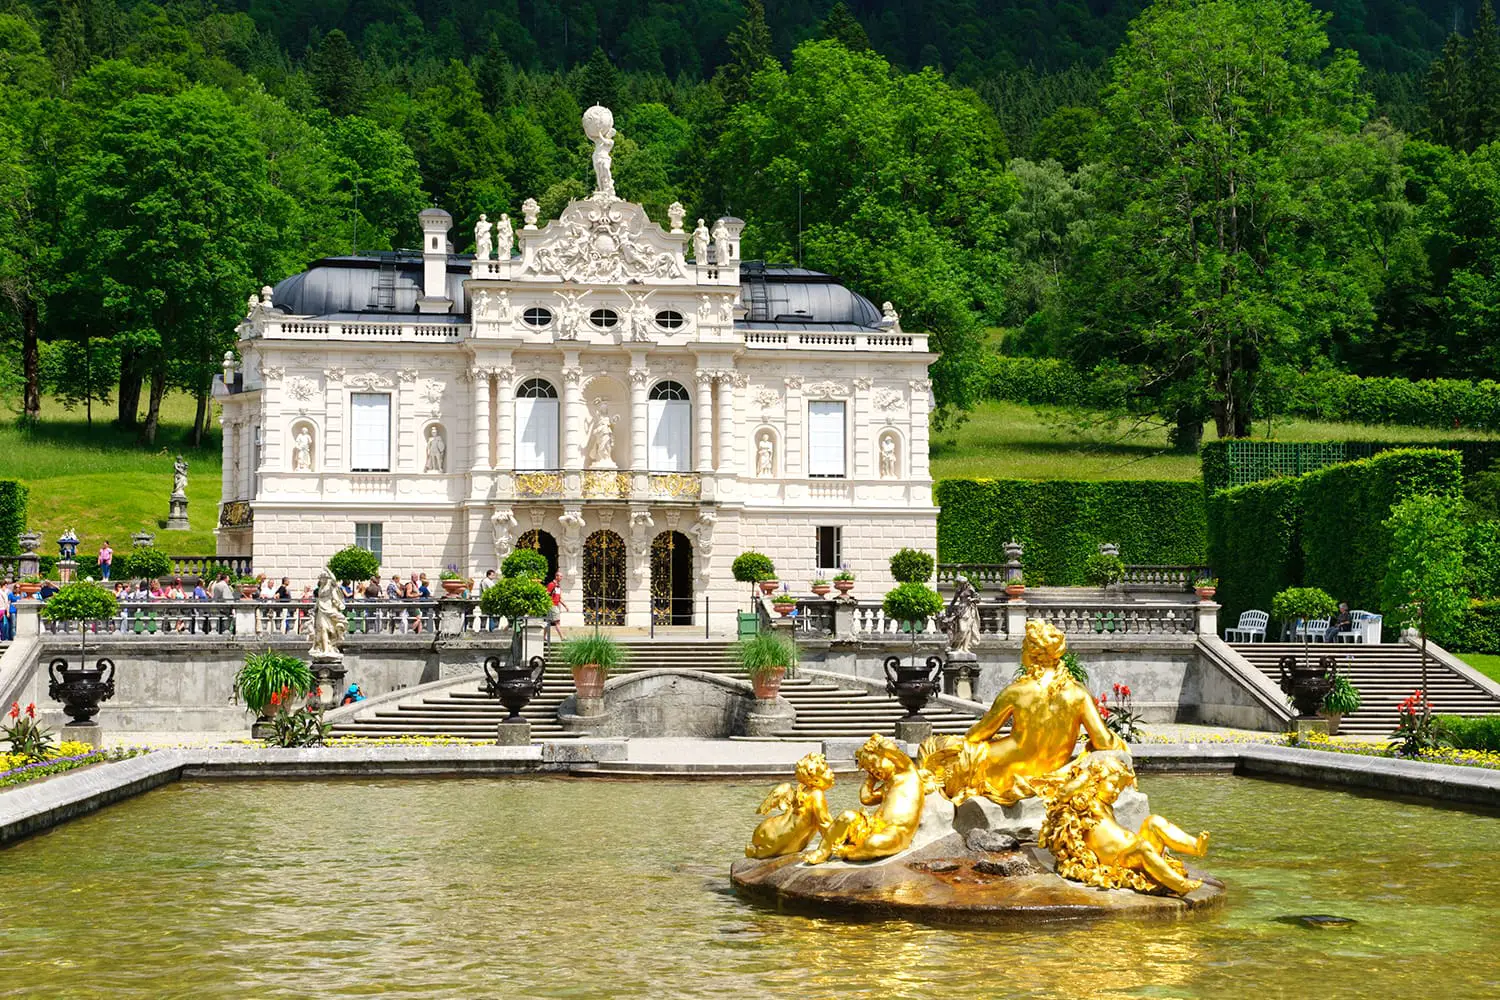 Linderhof Palace in Germany